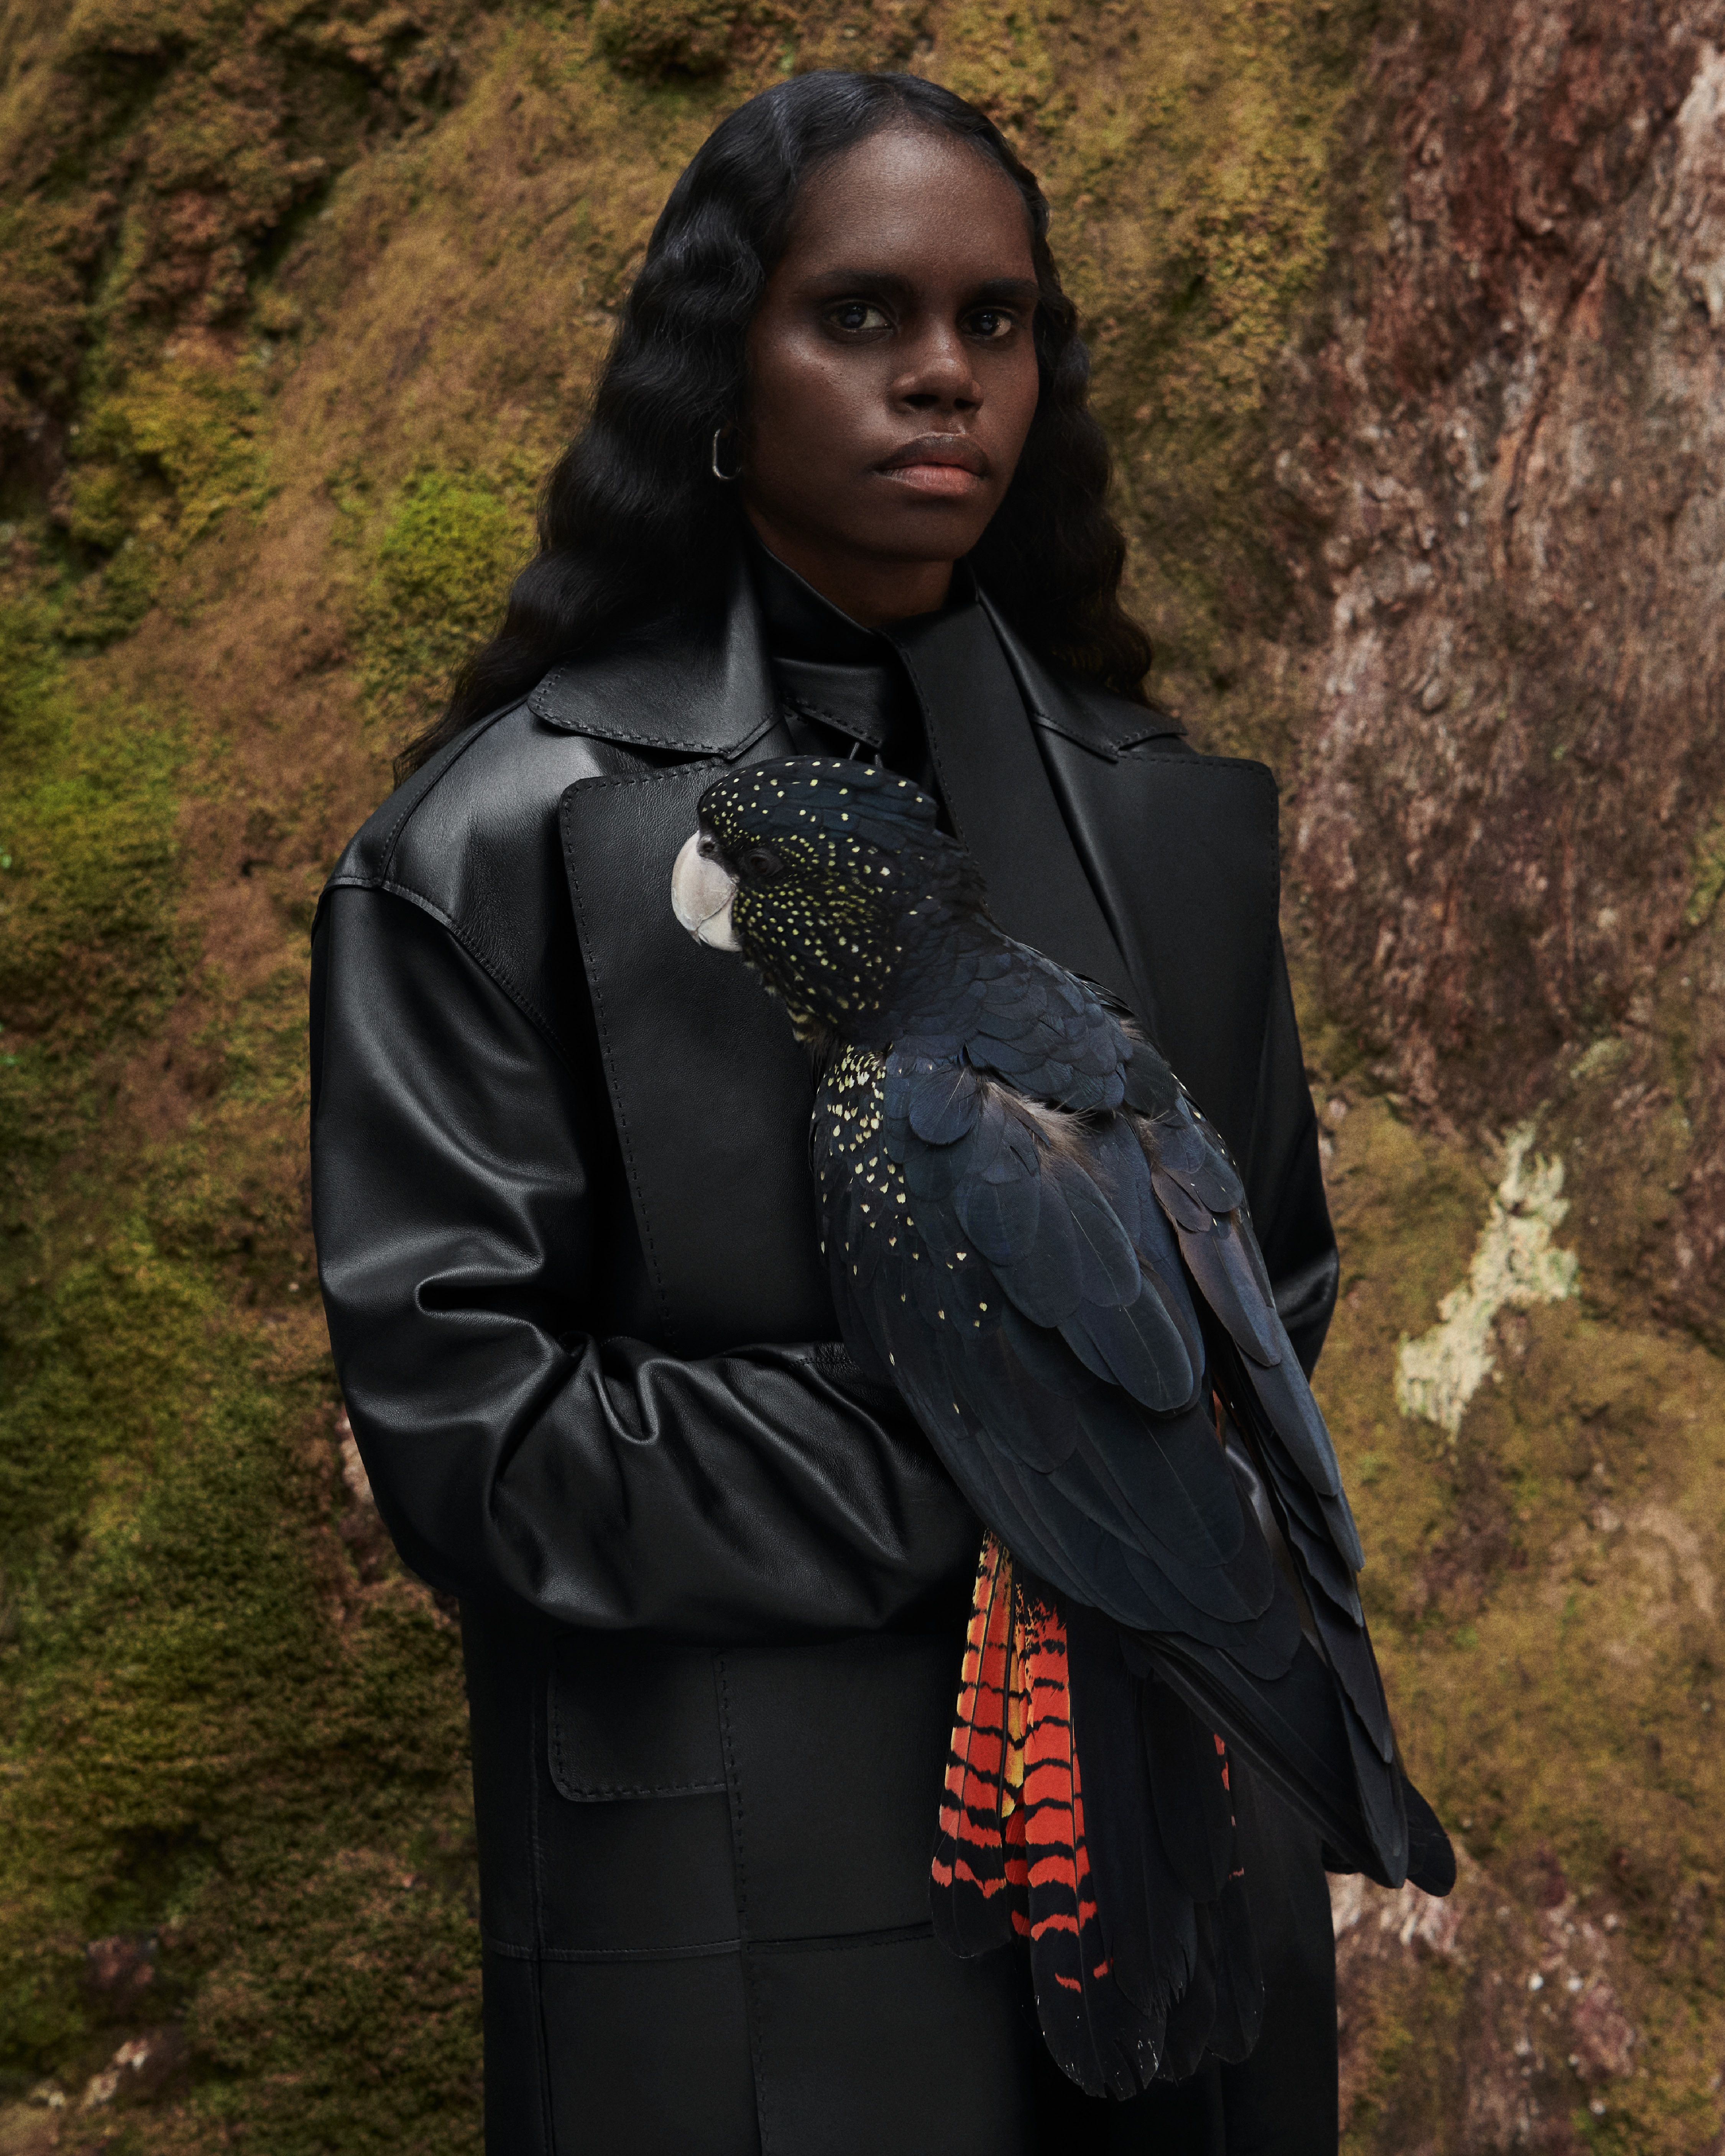 Model Tarlisa wearing a black leather top and trench coat with a cockatoo standing in front of a tree.